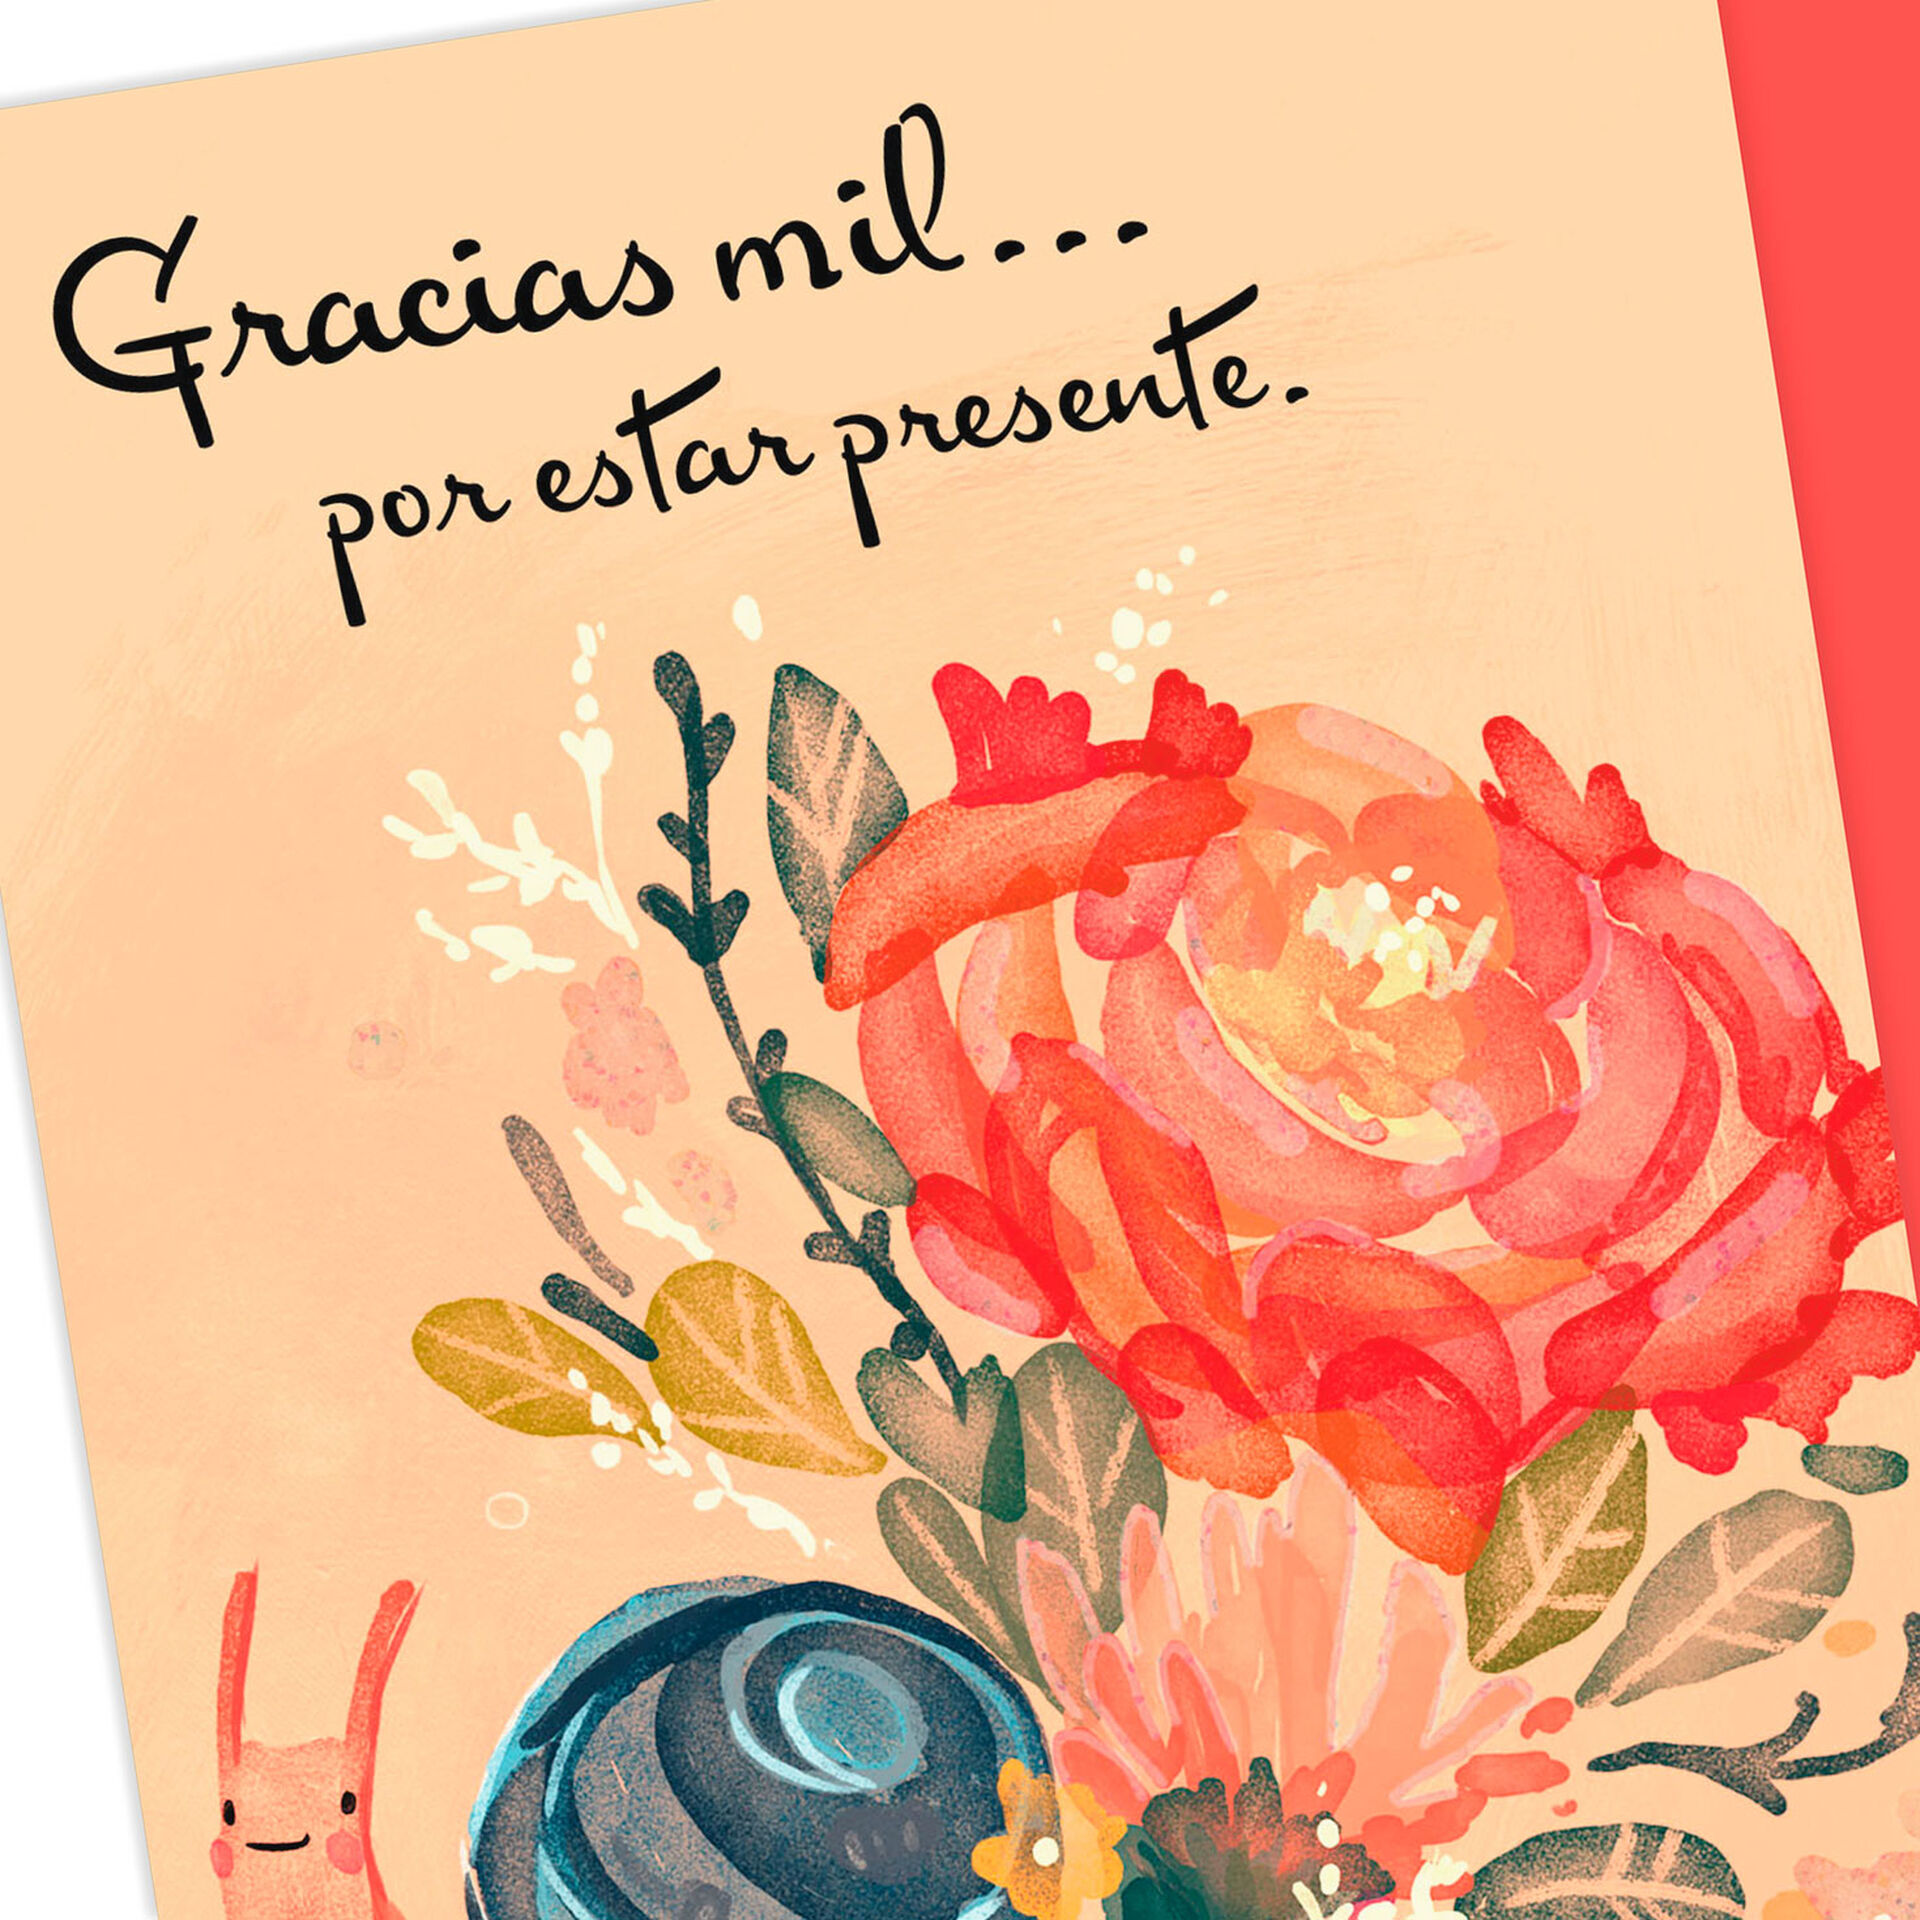 appreciate-your-being-there-spanish-language-thank-you-card-greeting